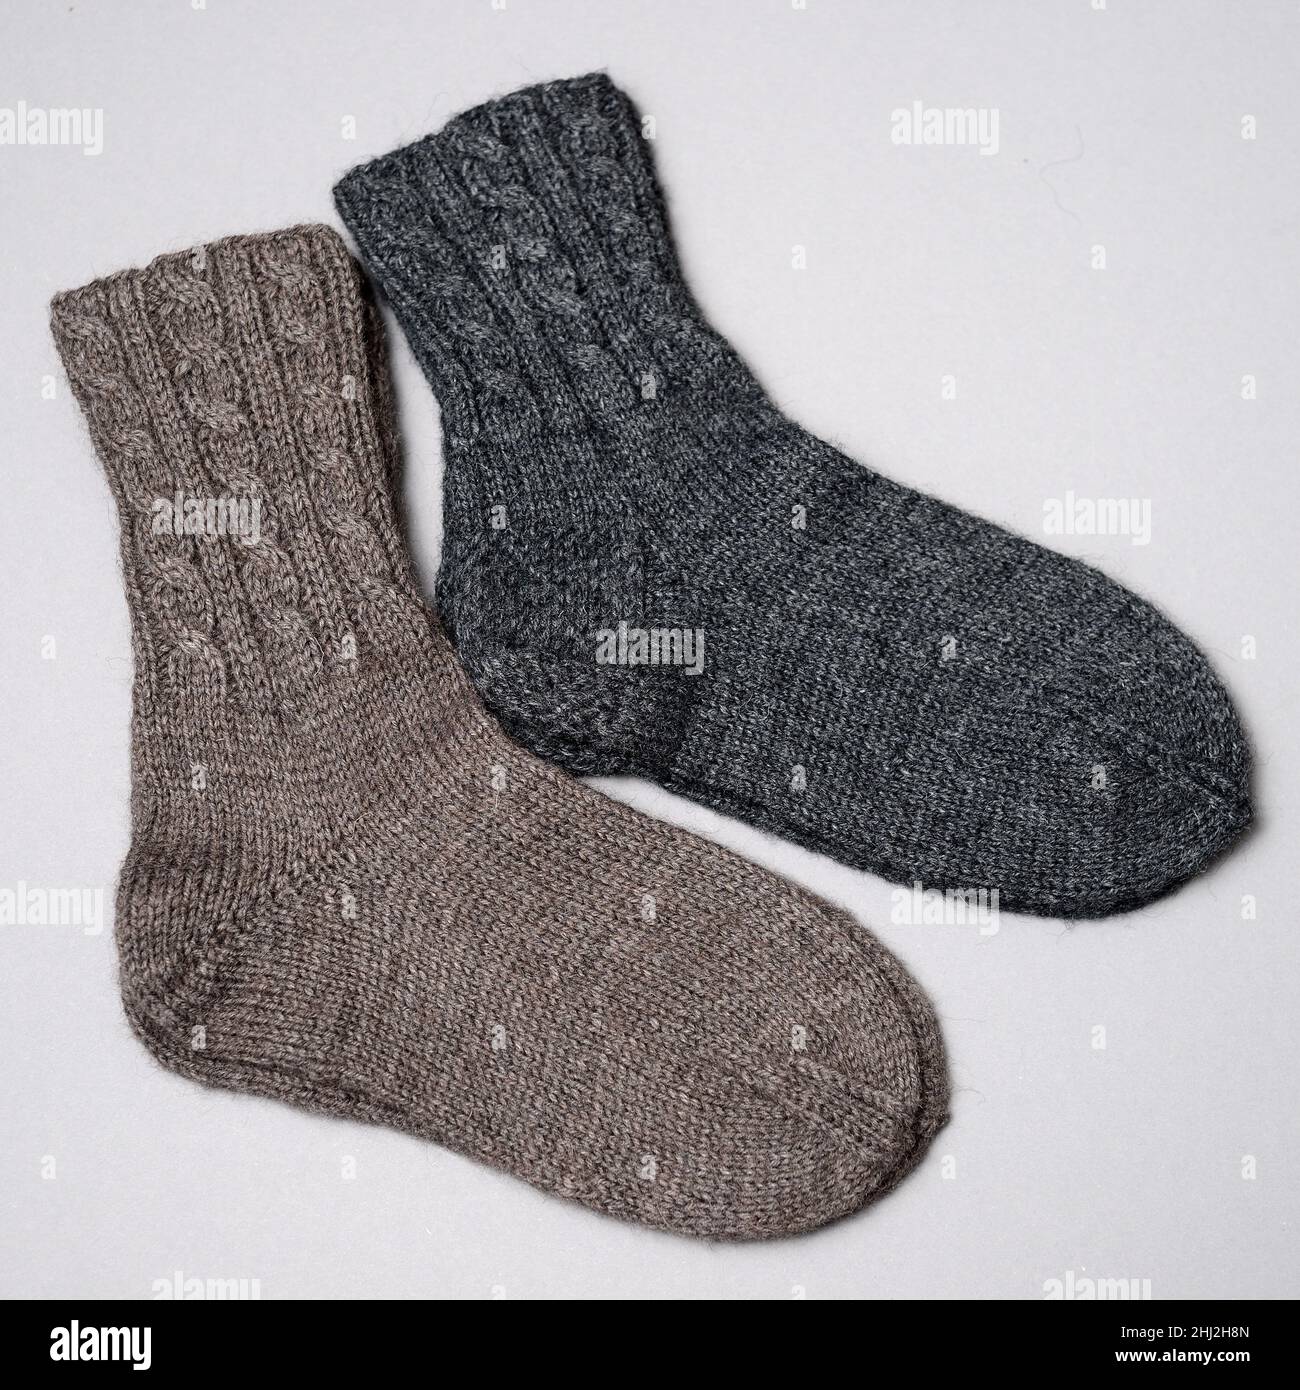 two pair of woolen knitted socks on a gray background Stock Photo